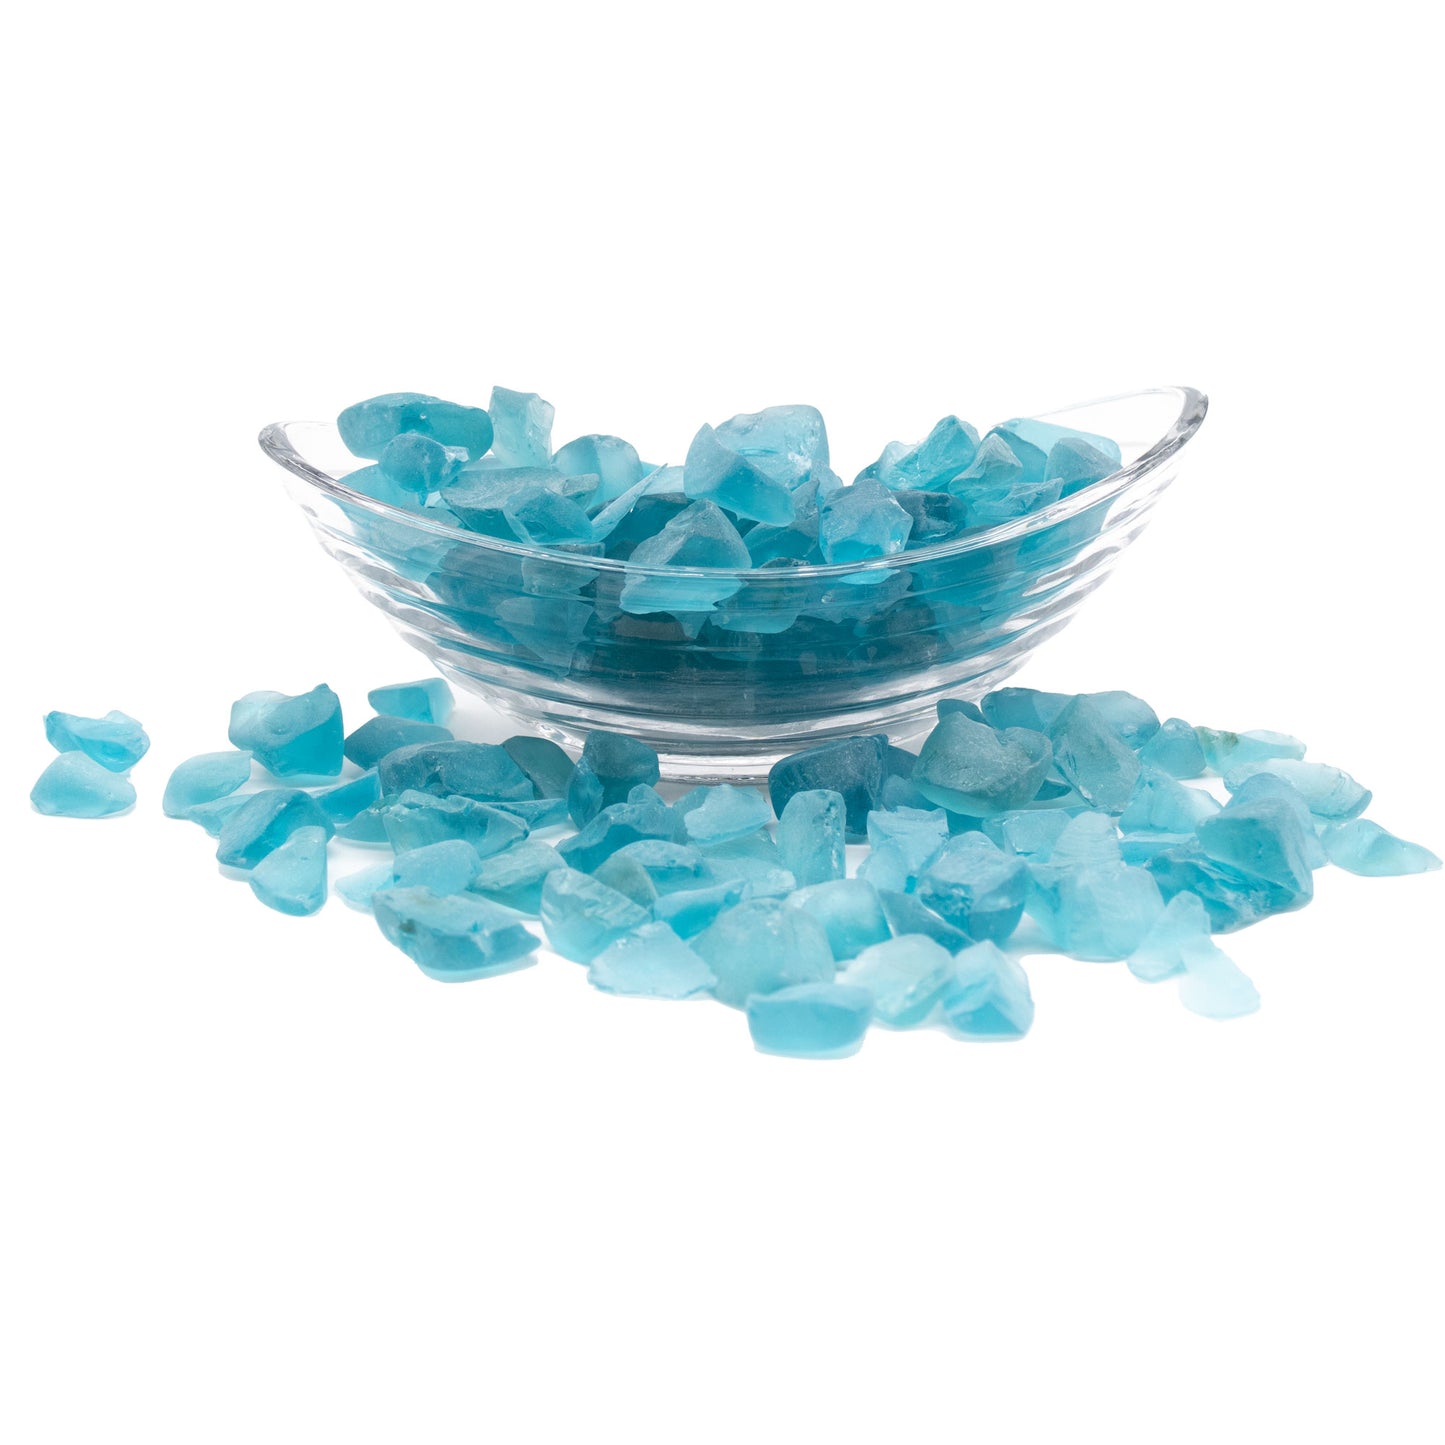 Baby Blue Frosted Sea Glass Pebbles - 4 lb